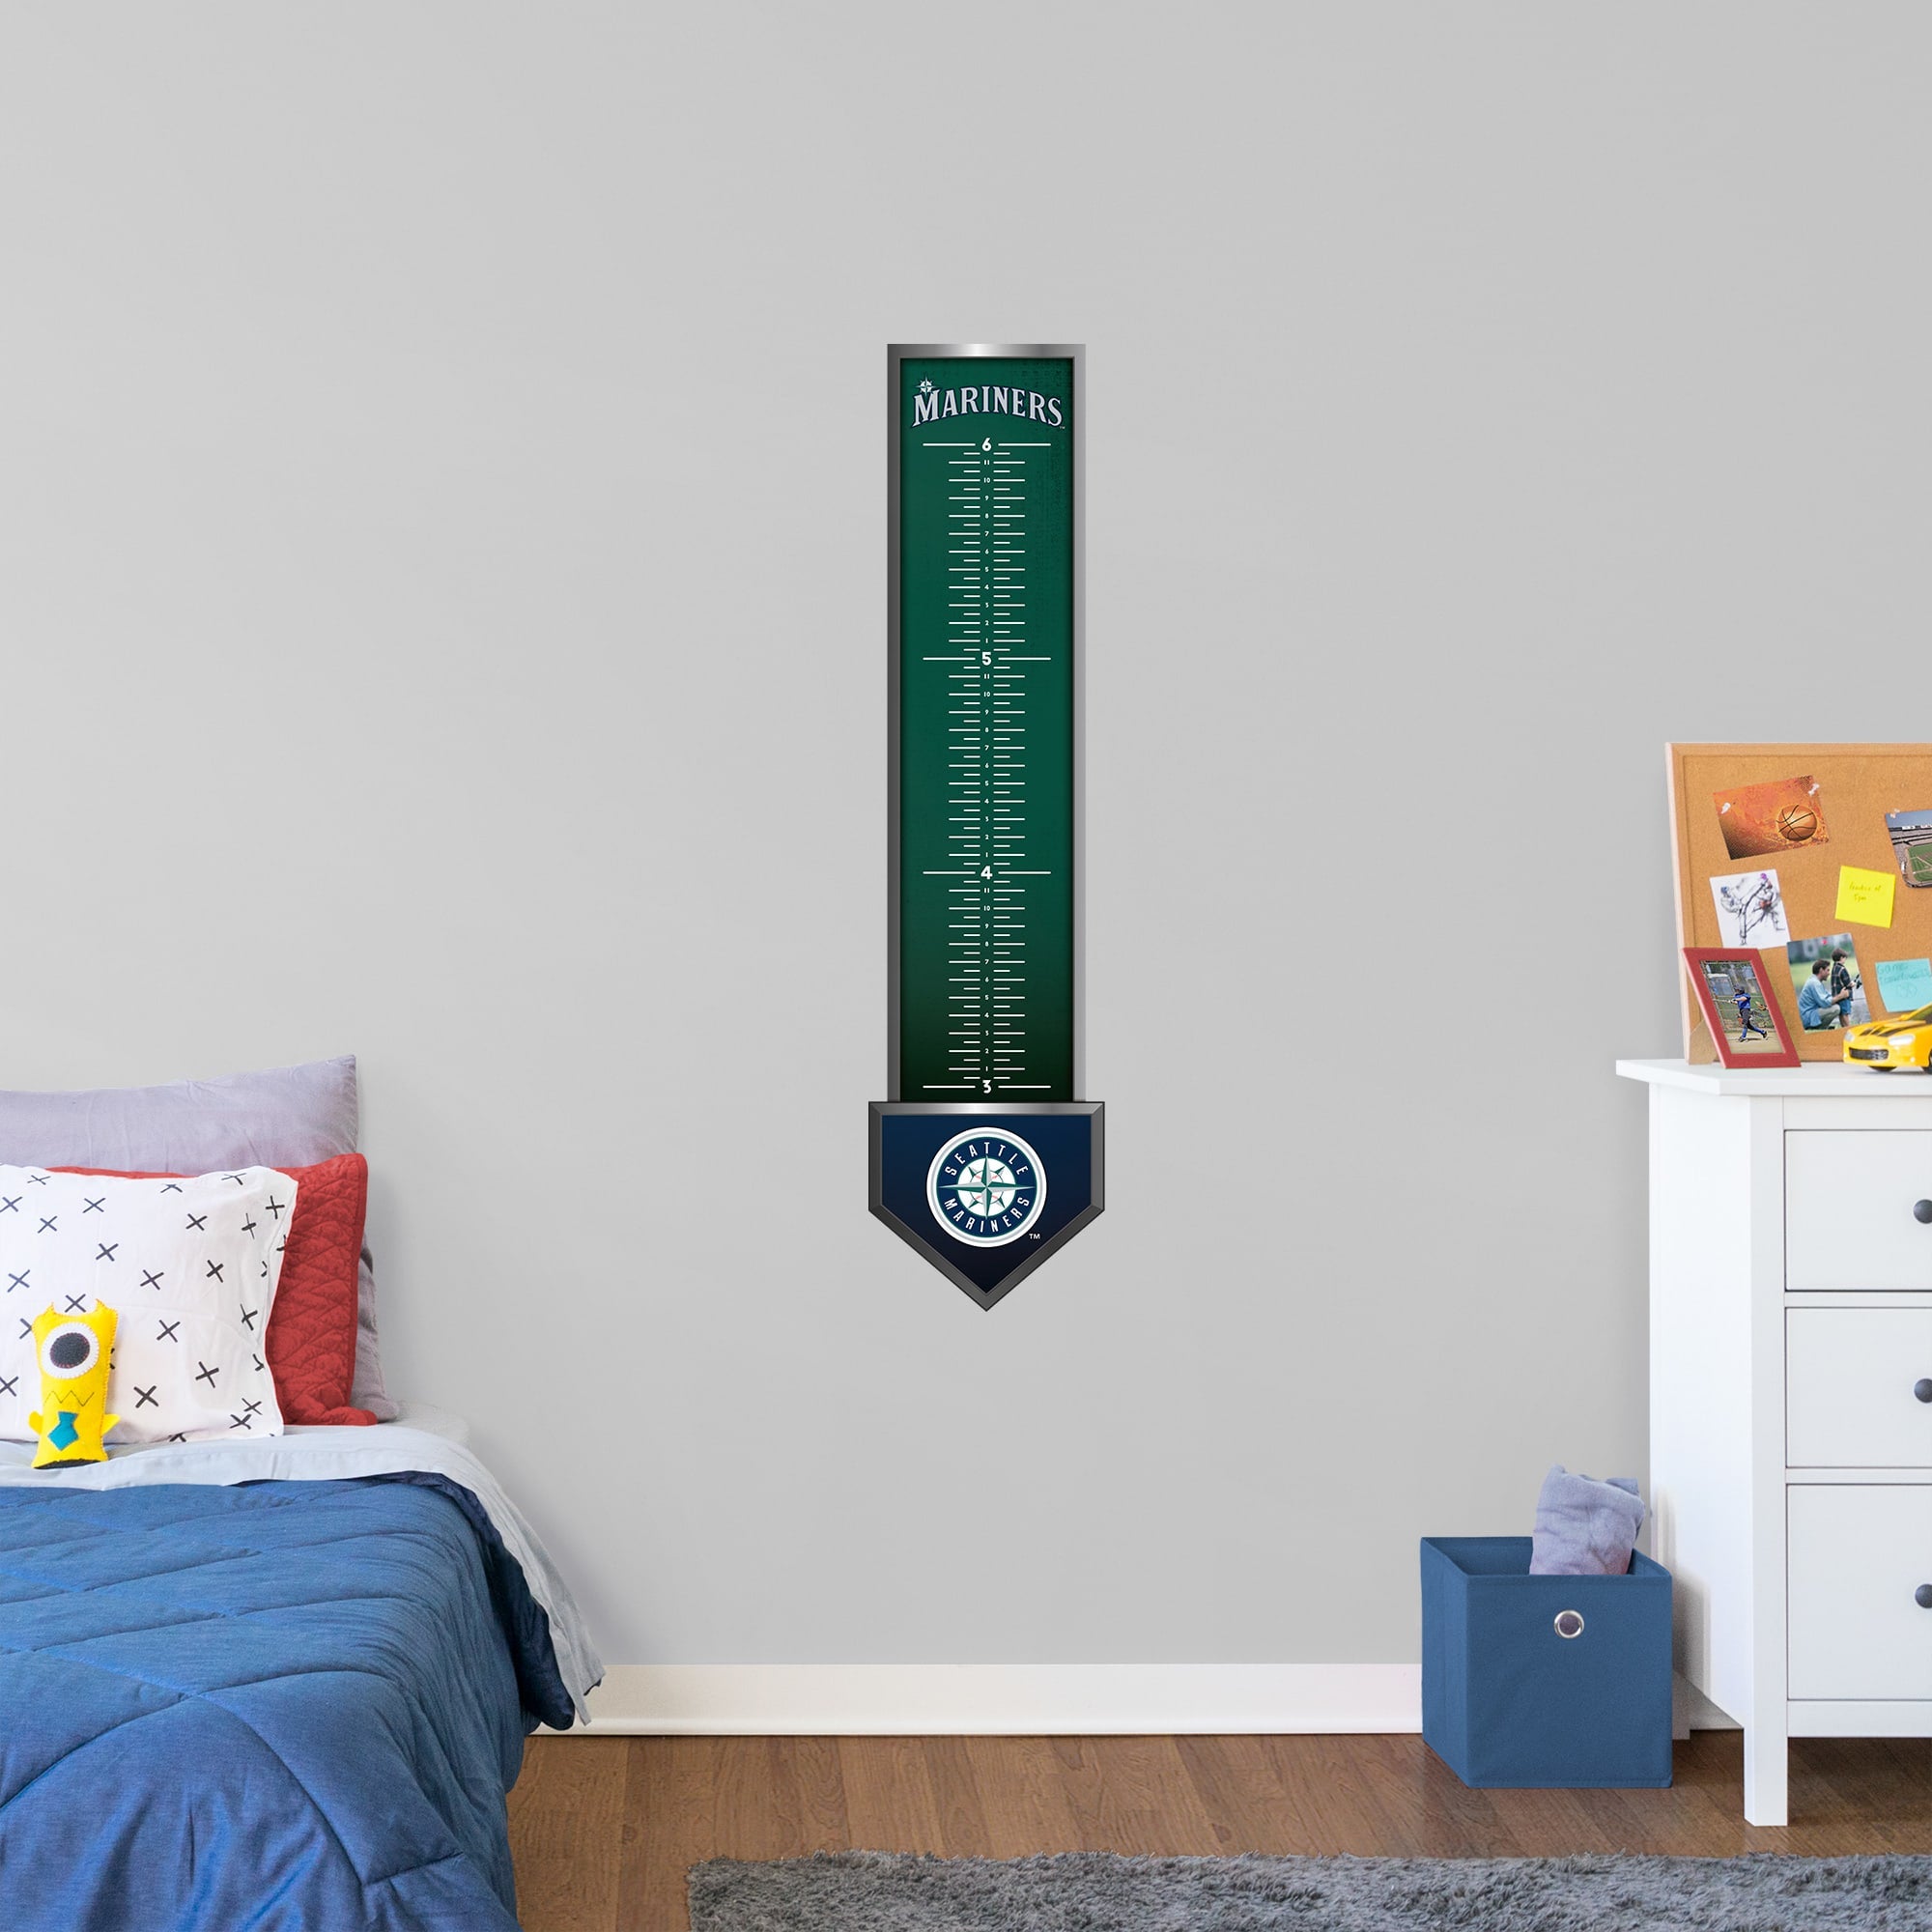 Seattle Mariners: Growth Chart - Officially Licensed MLB Removable Wall Graphic 13.0"W x 54.0"H by Fathead | Vinyl